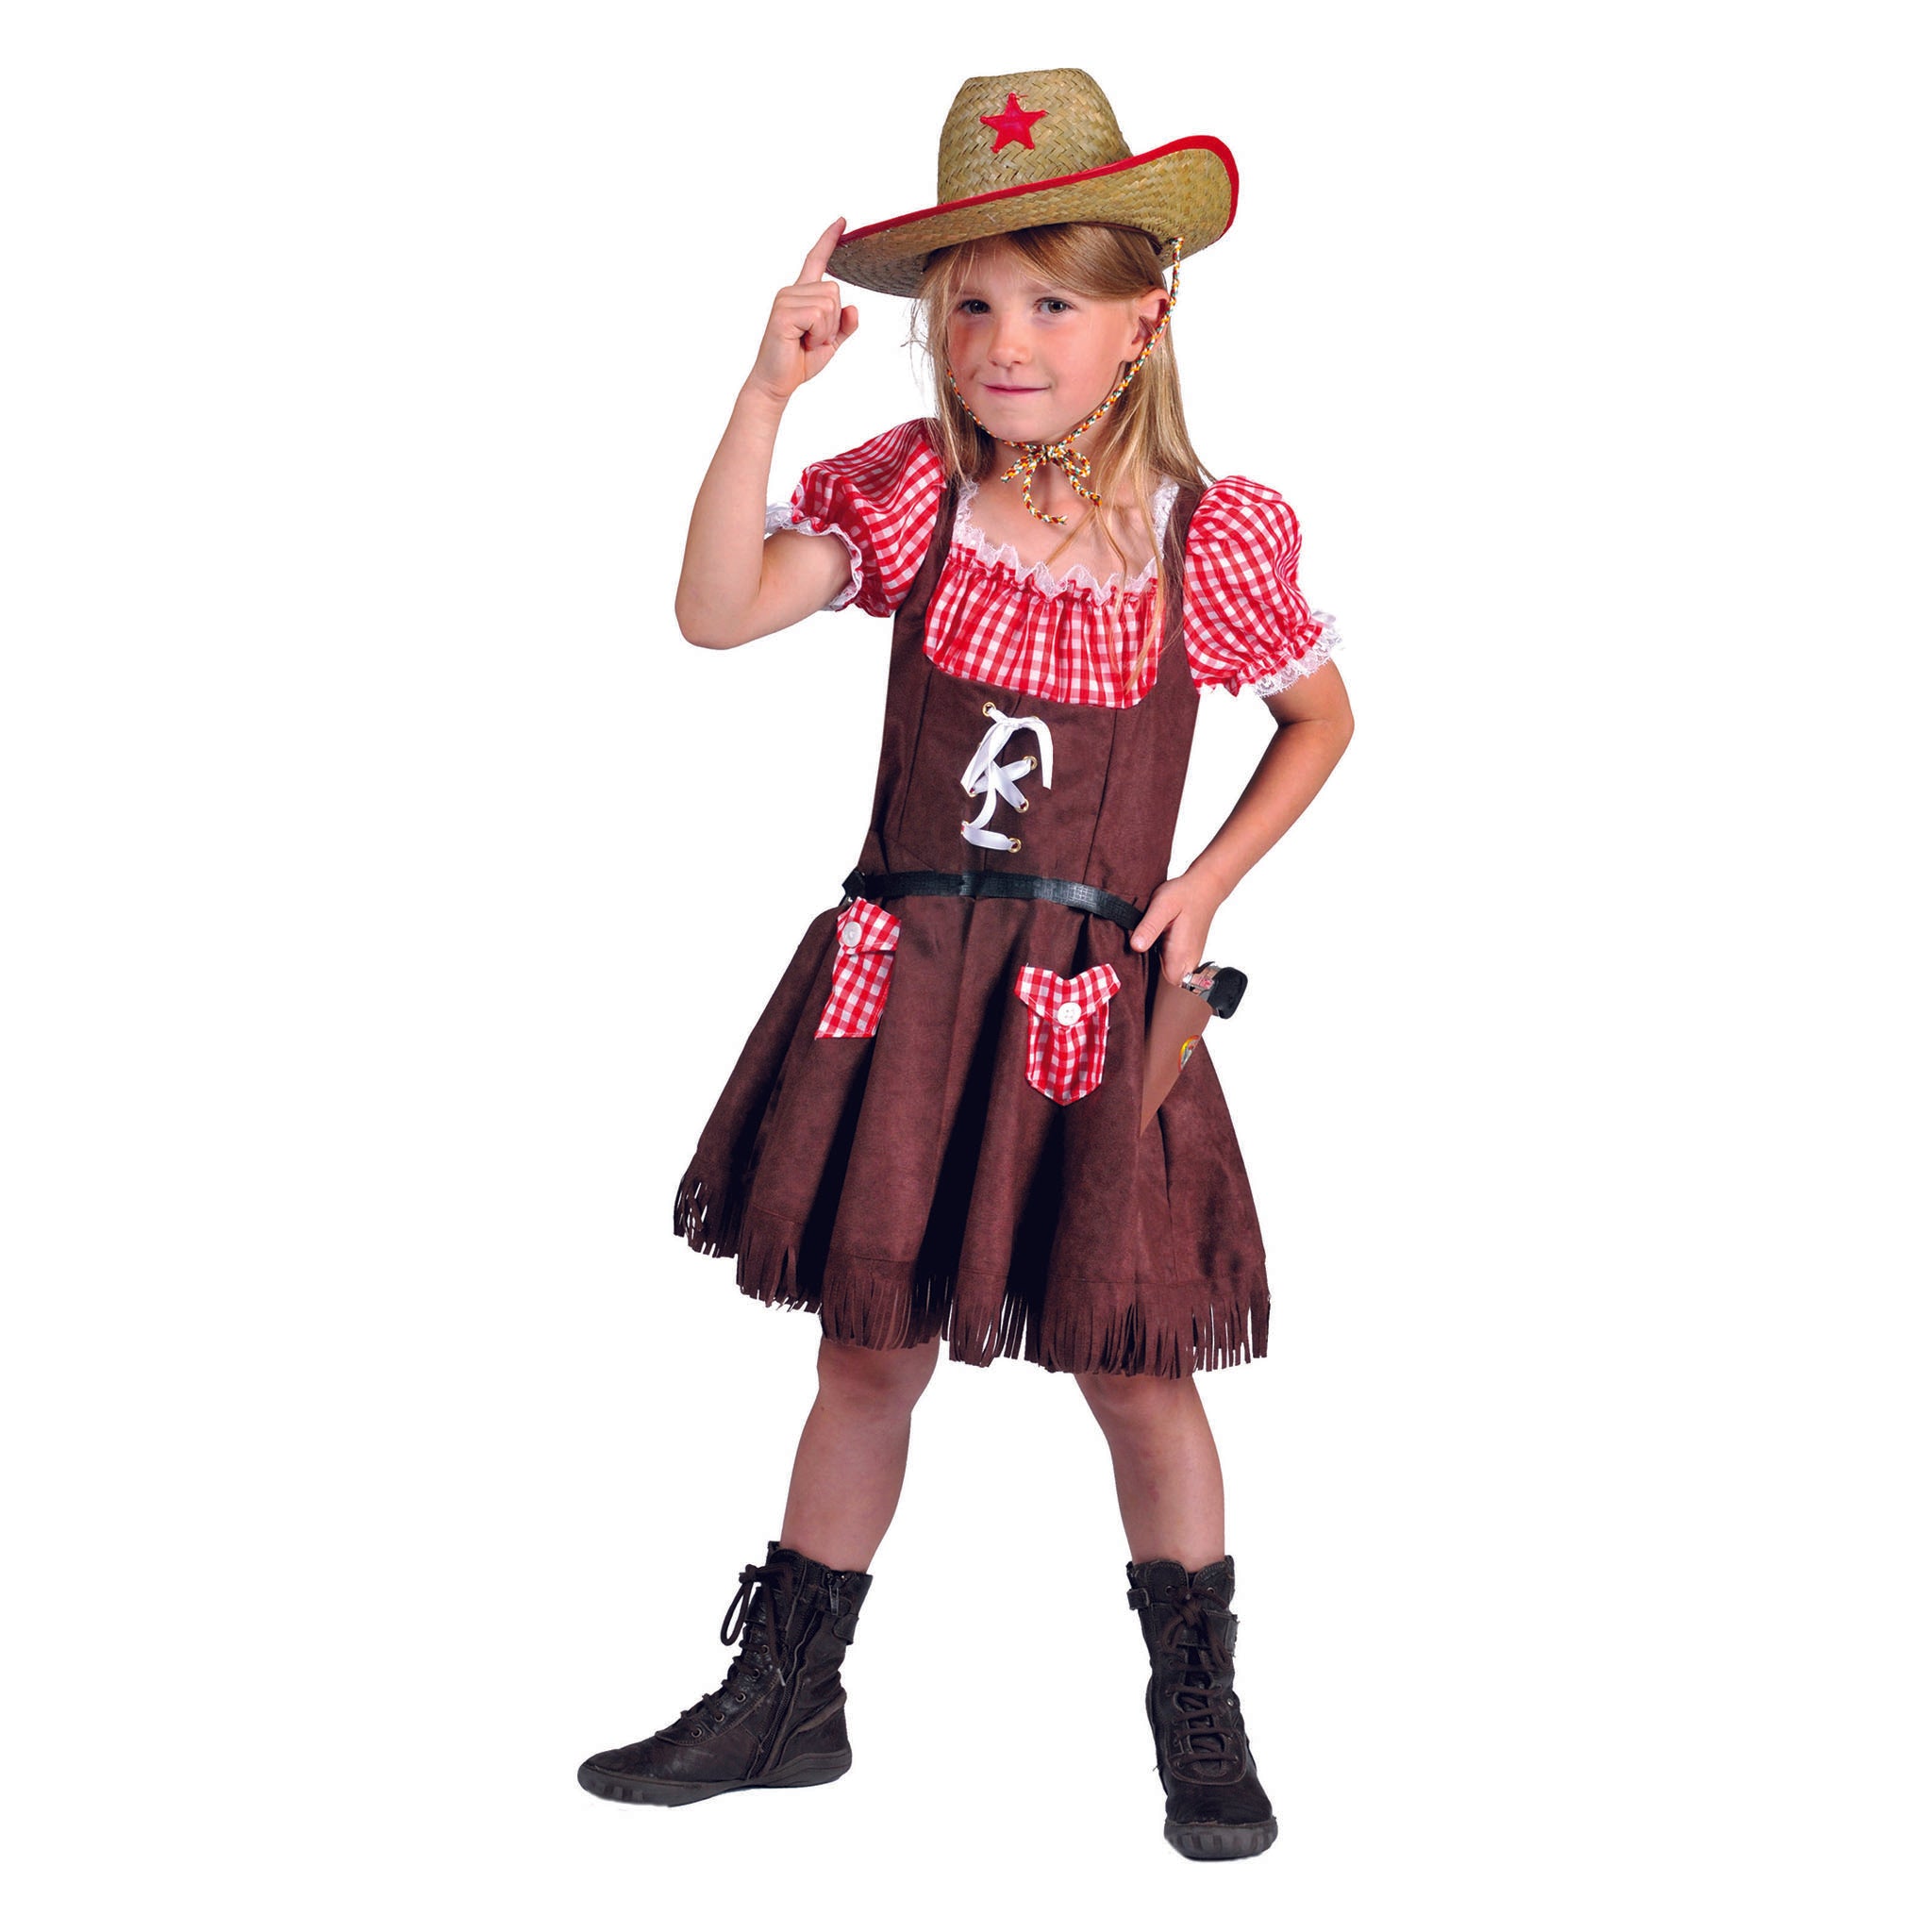 Costume Bambina Cow Girl Wild West Tg 5/9A – Universo In Festa